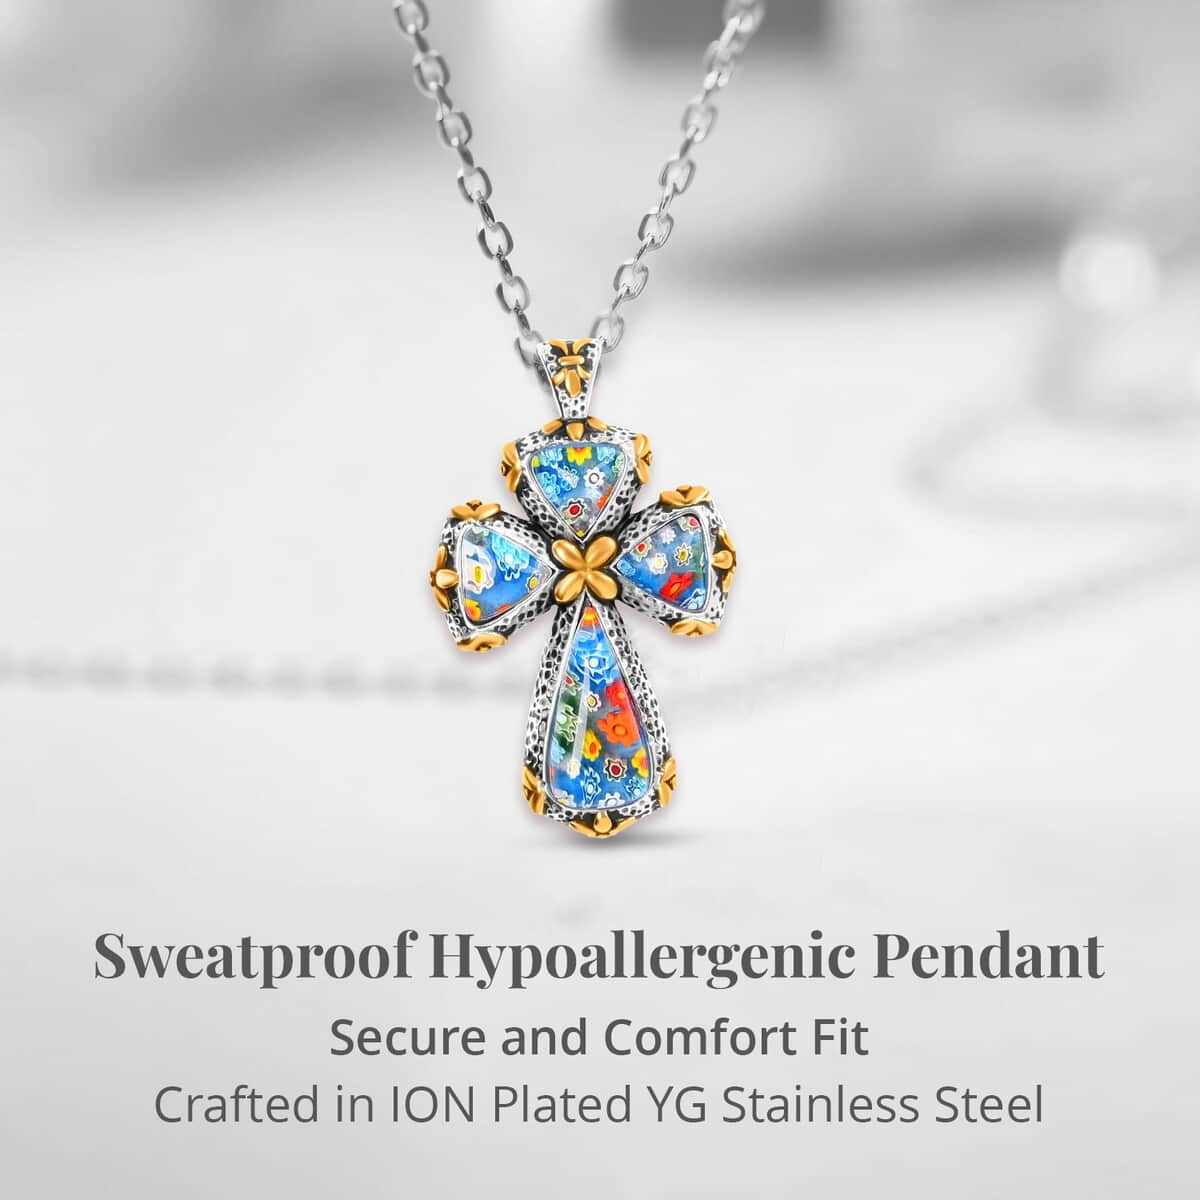 Murano Style Cross Pendant Necklace For Women in ION Plated YG Stainless Steel, Floral Millefiori Pendant Necklace, Sweatproof Hypoallergenic Necklace, Gift For Her image number 3